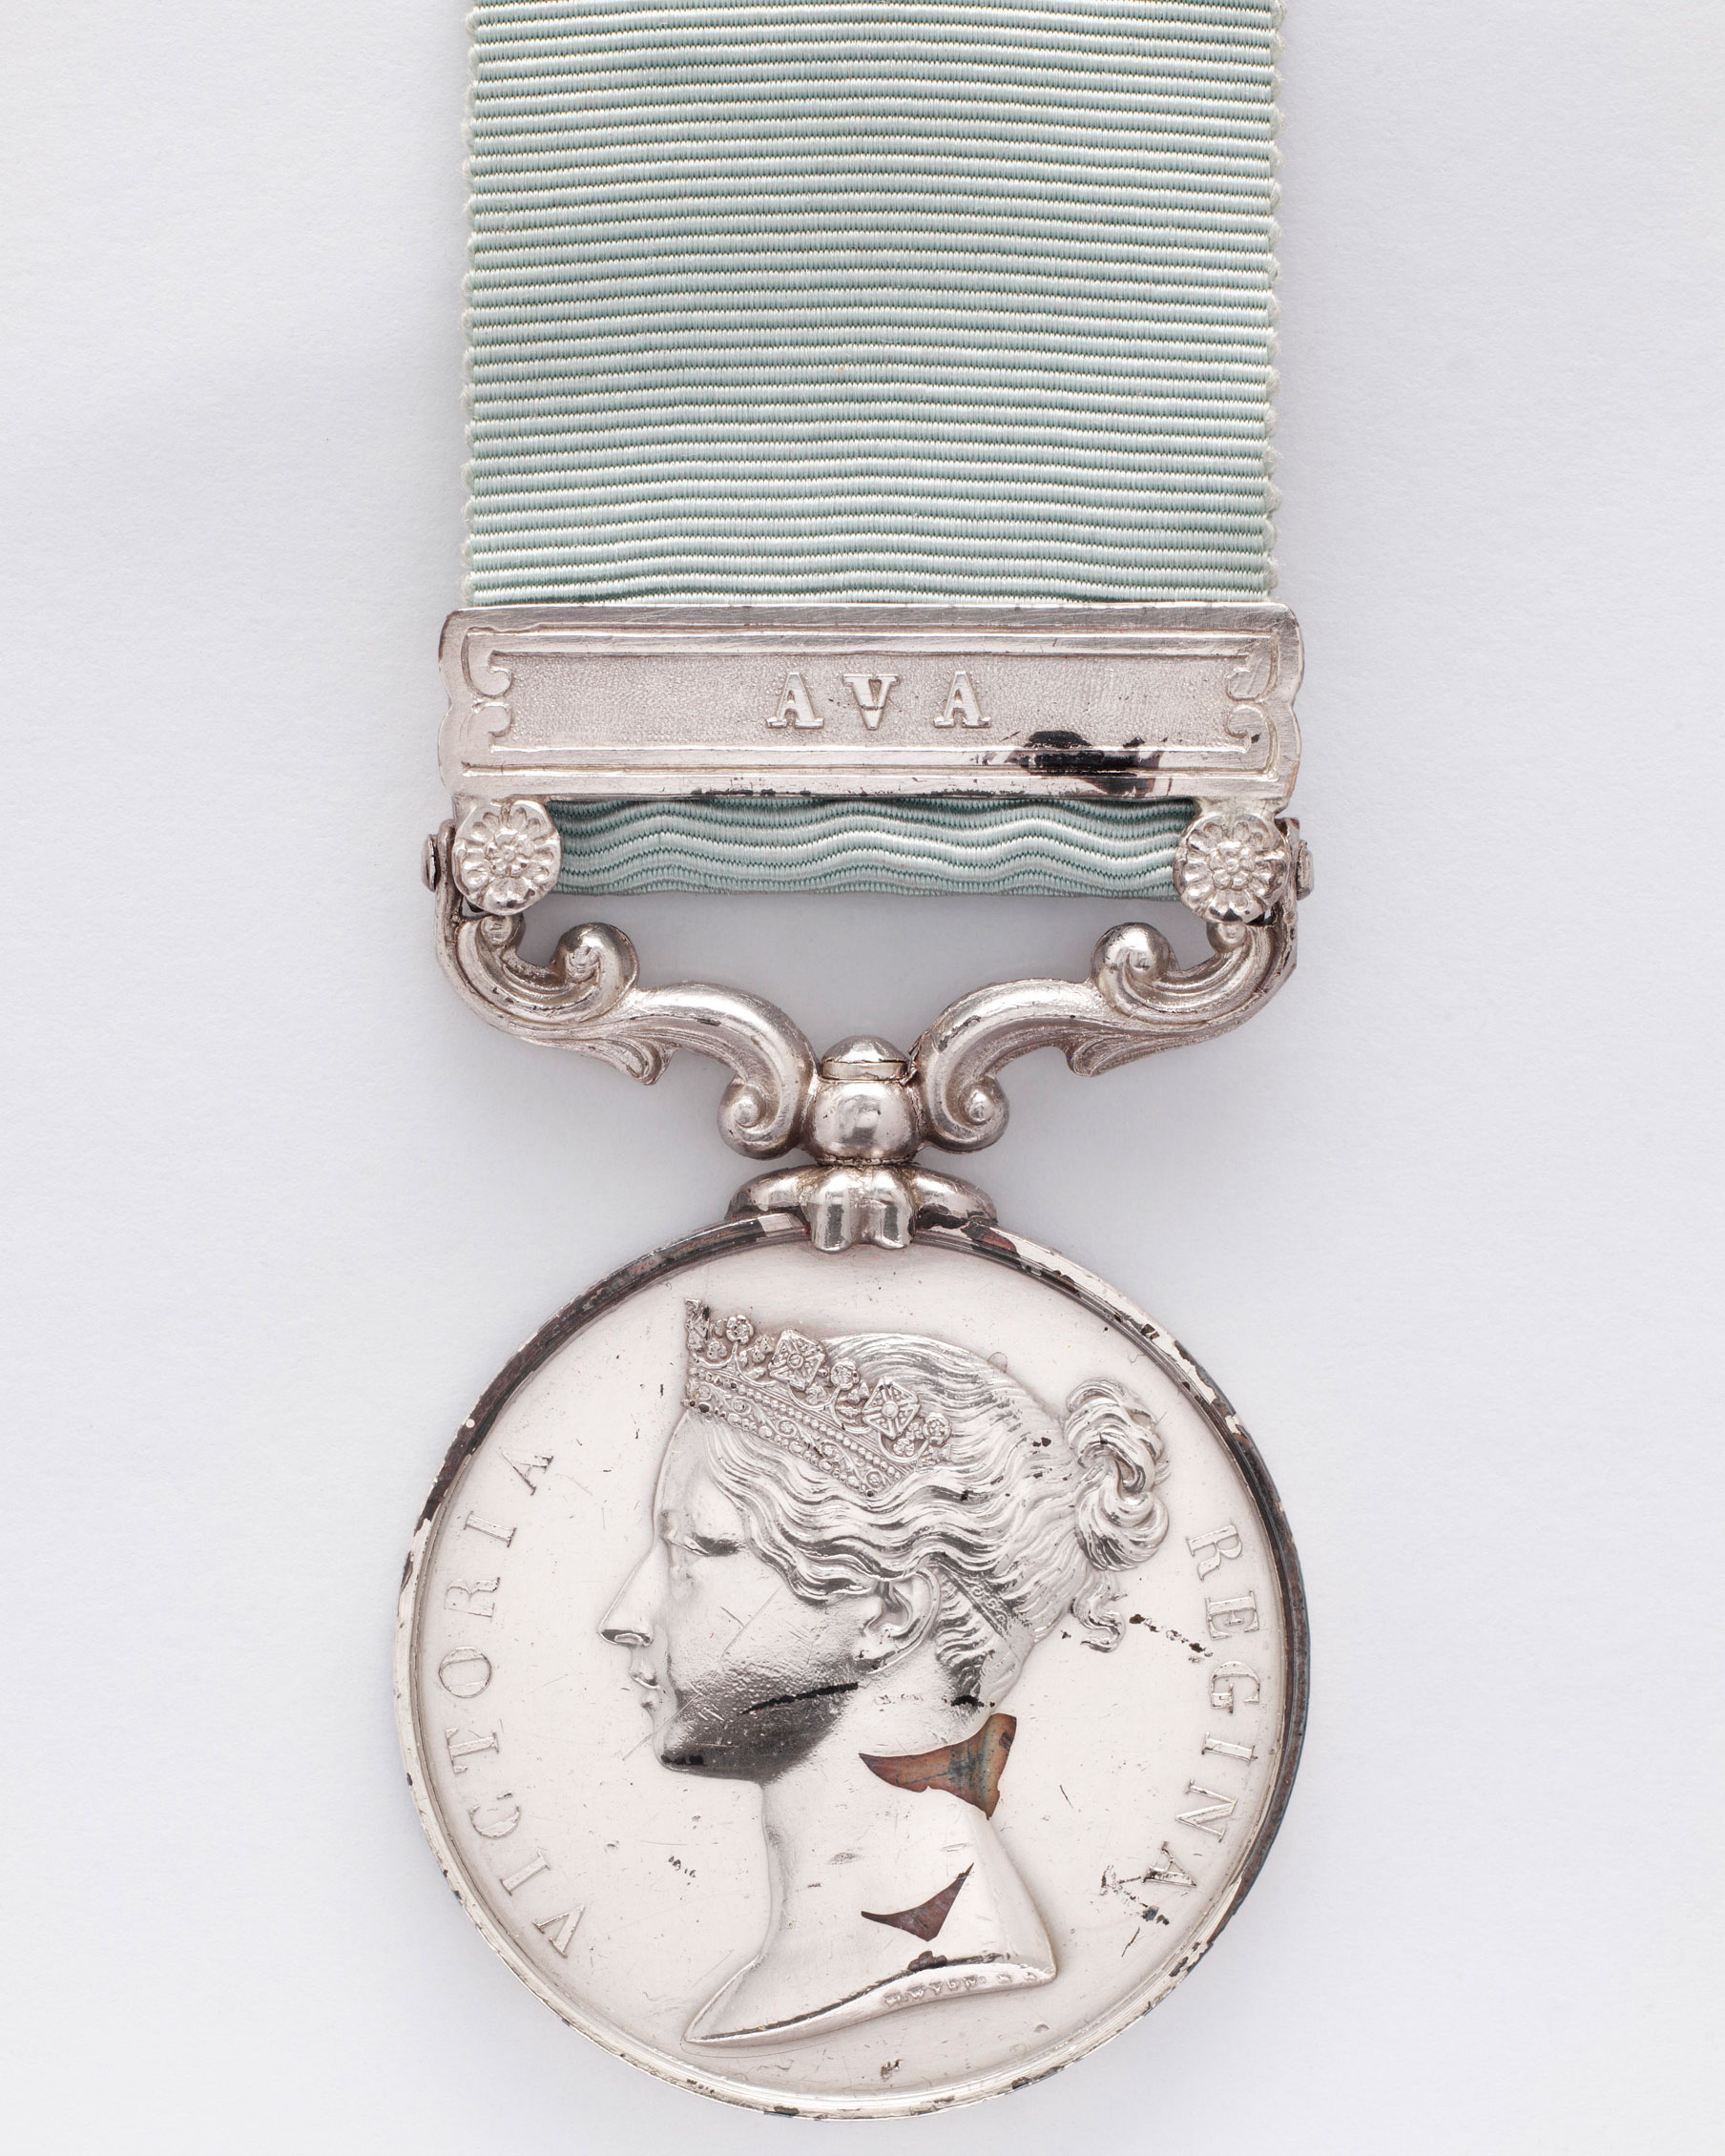 Army of India Medal 1799-1826, with clasp, 'Ava'